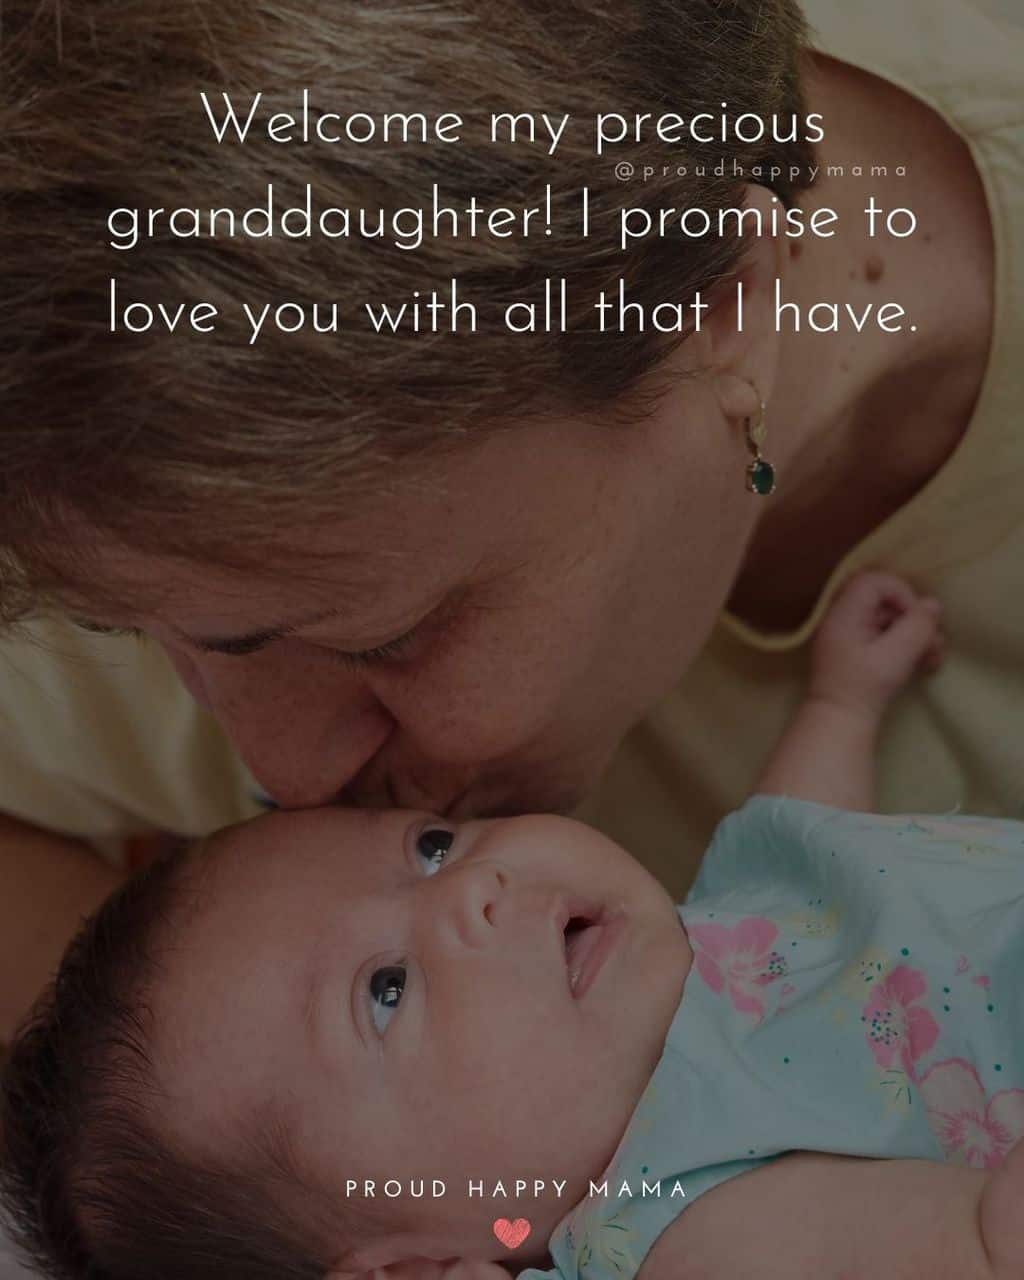 Granddaughter Quotes - Welcome my precious granddaughter! I promise to love you with all that I have.’